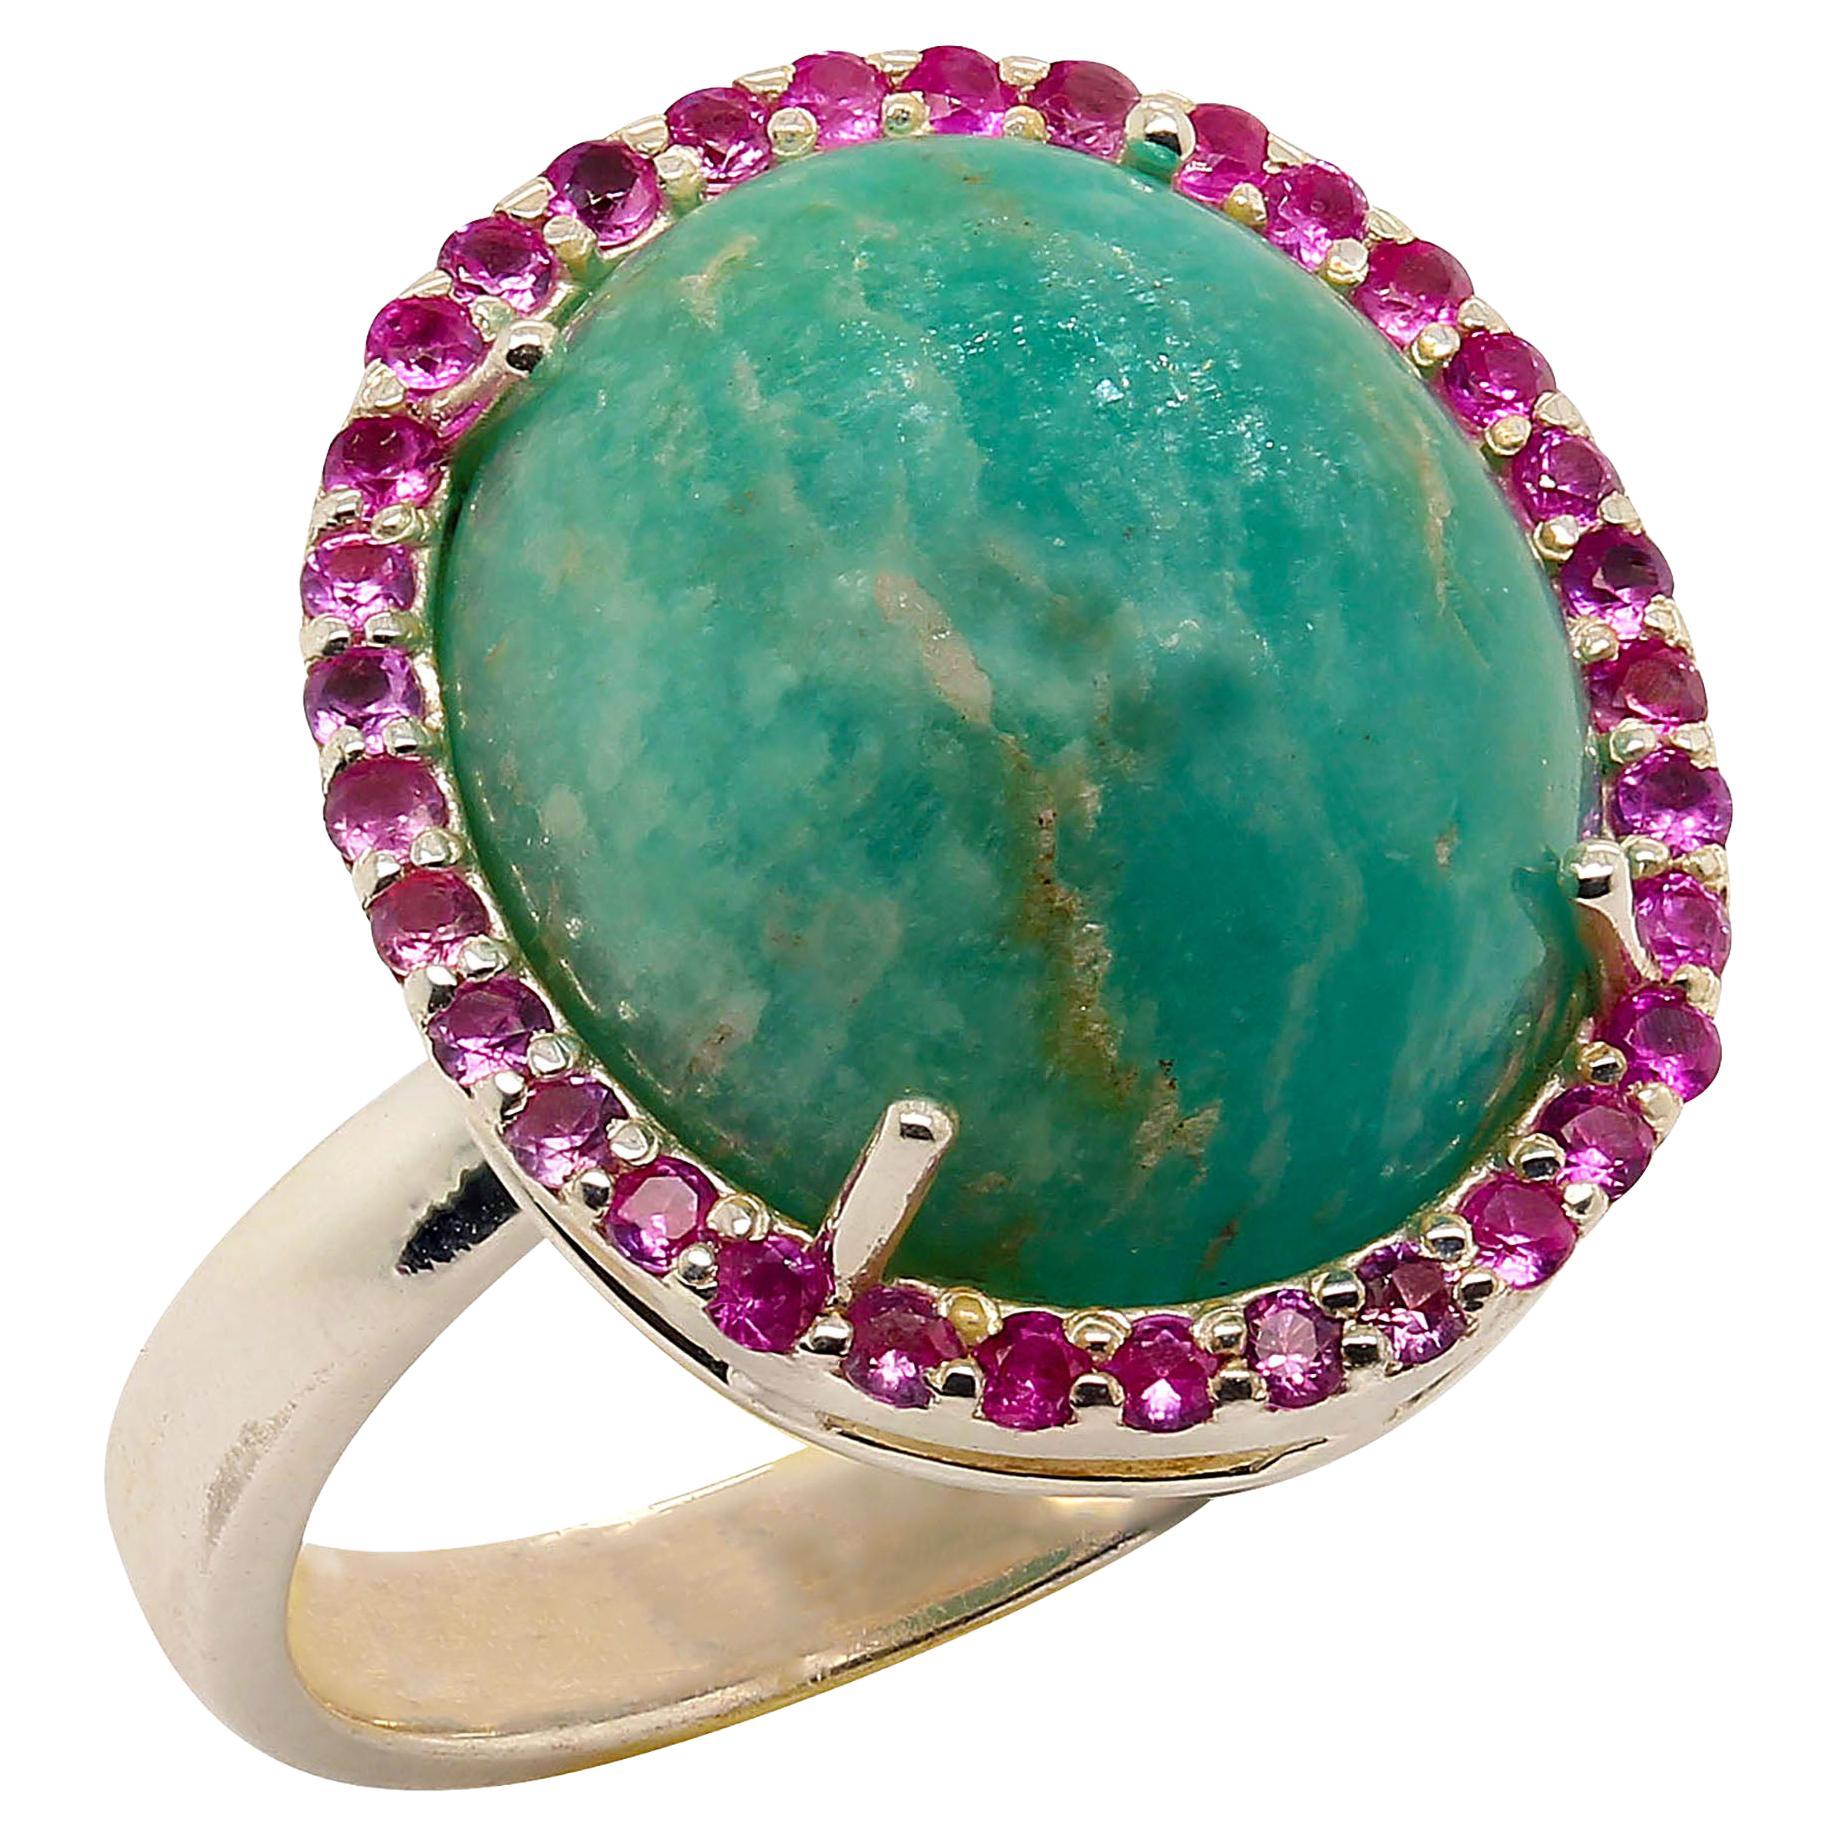 Amazonite cabochon enhanced with sparkling pink Sapphires ring to grace your hand. Amazonite is such a great green gemstone, it has wonderful features and style, and is highly polished and although opaque, it seems as if one can look right into the